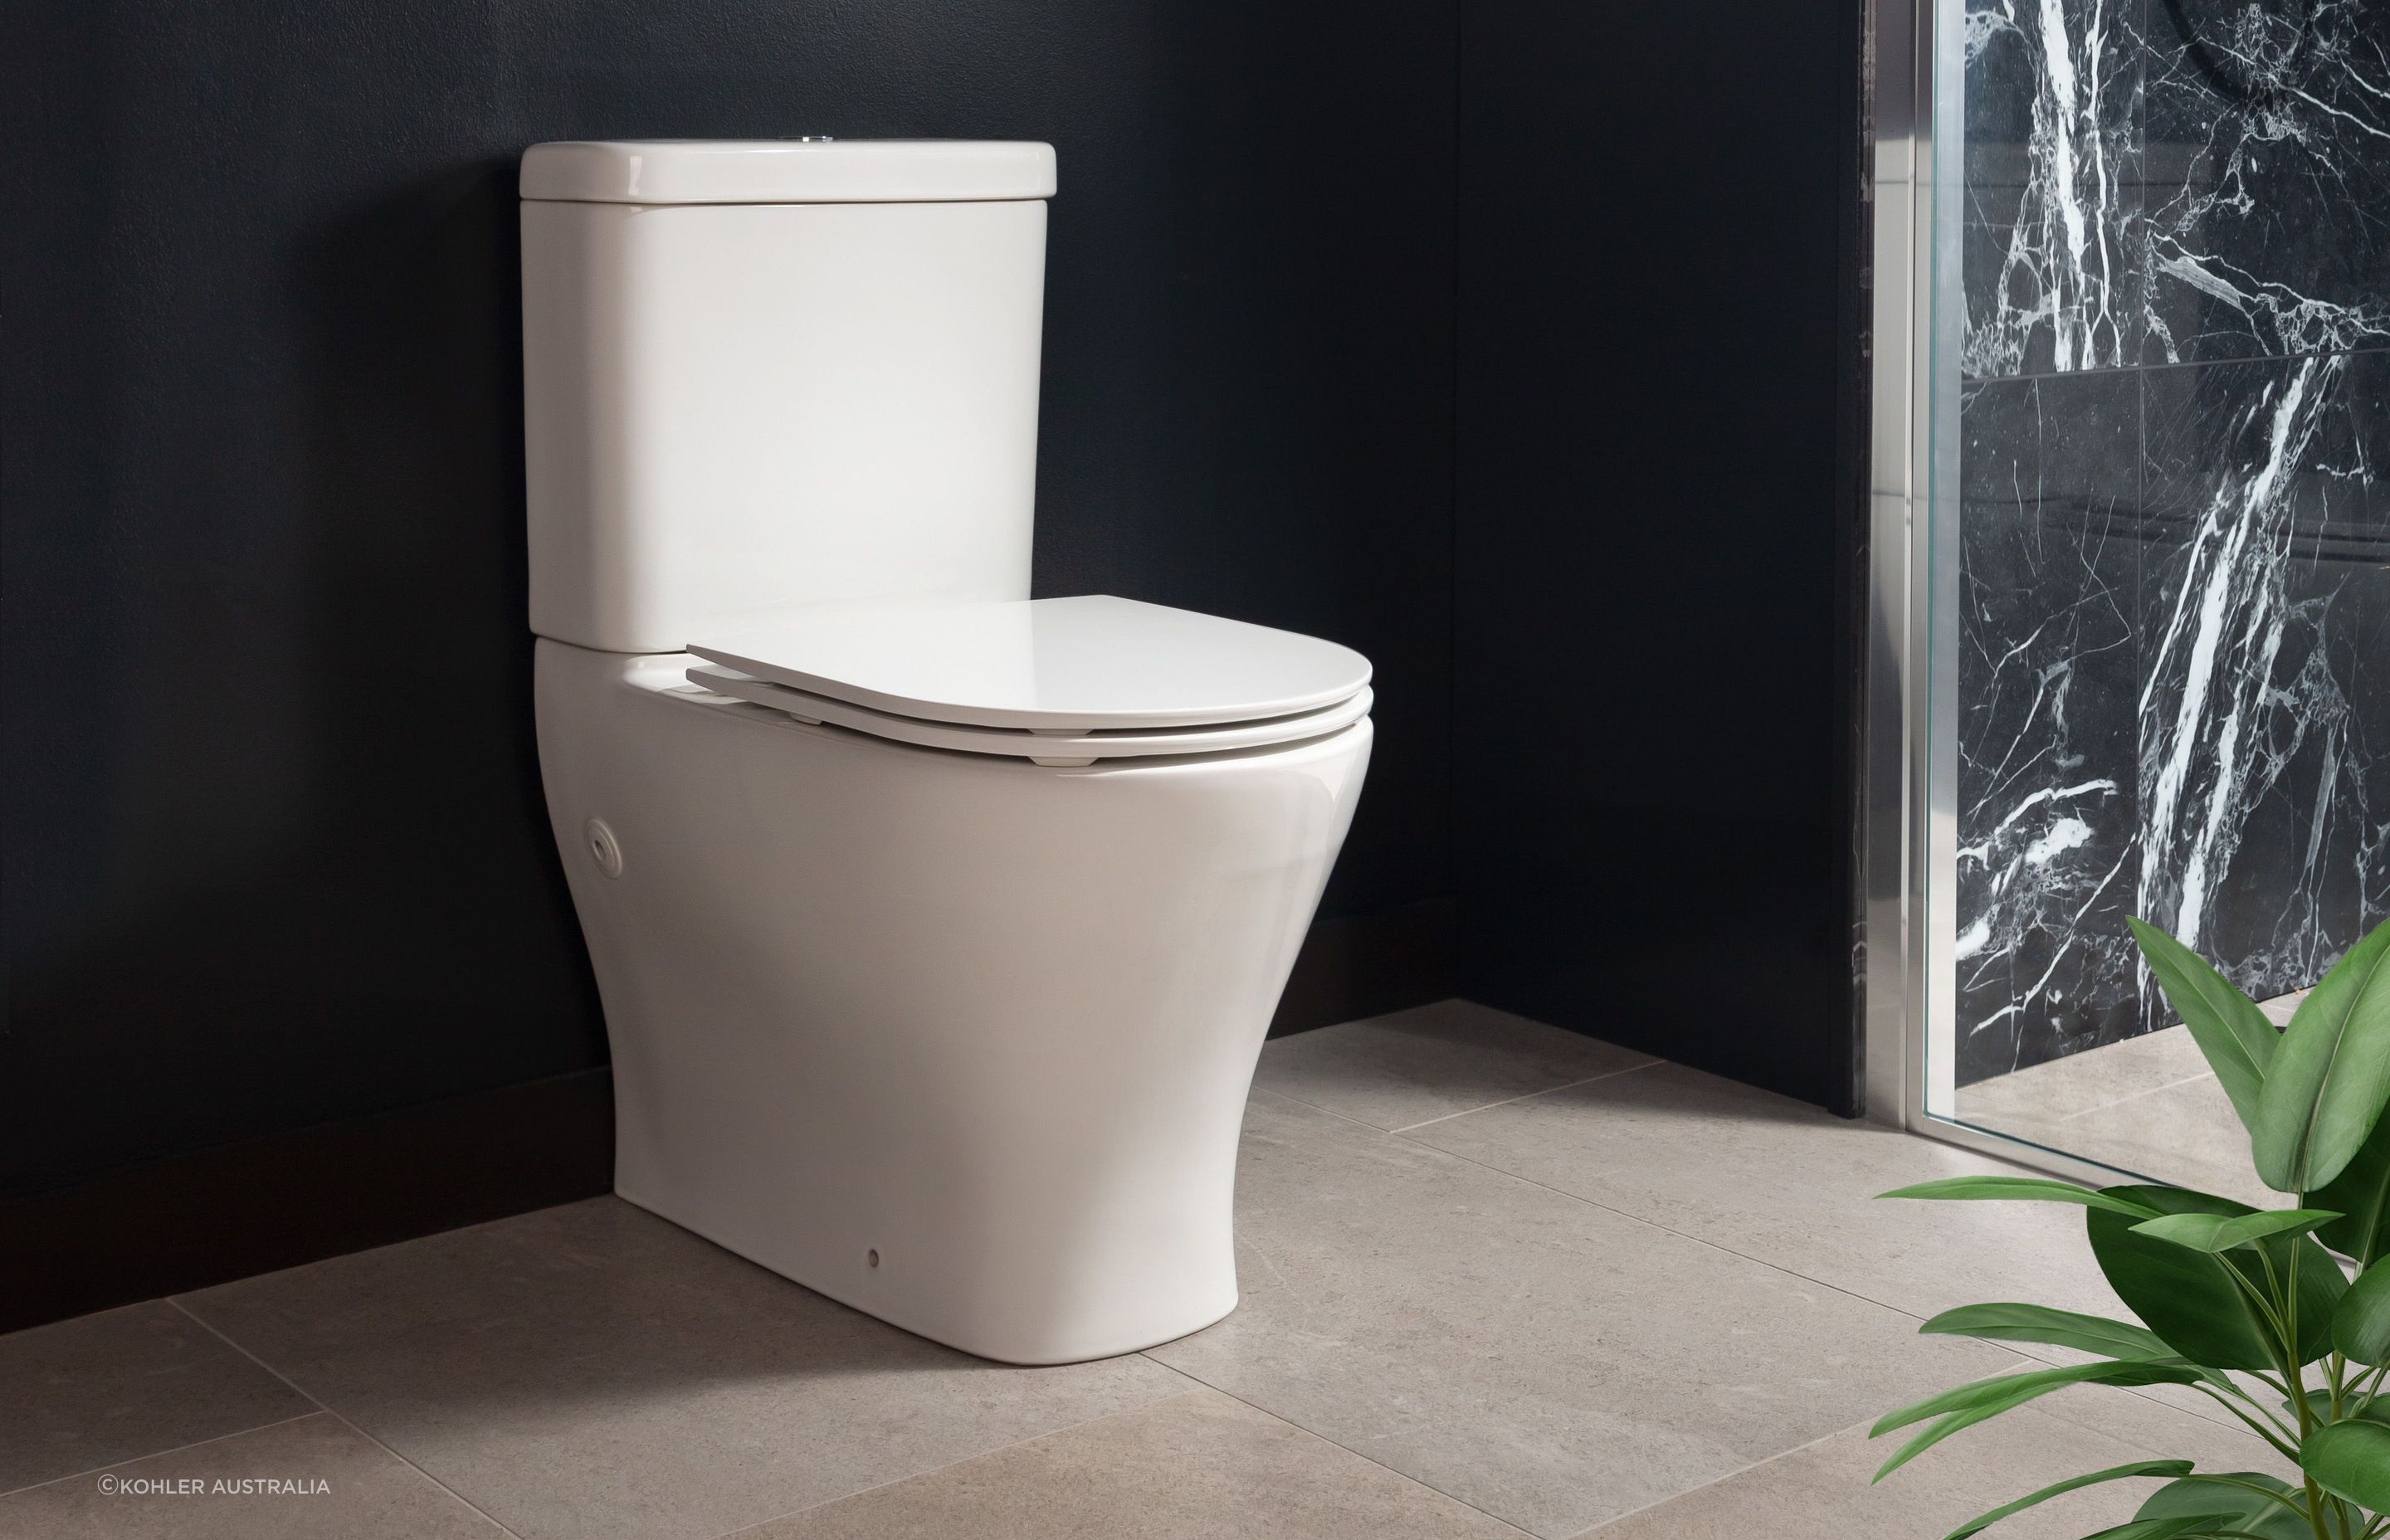 Installing a new toilet suite is often part of a larger bathroom renovation project.